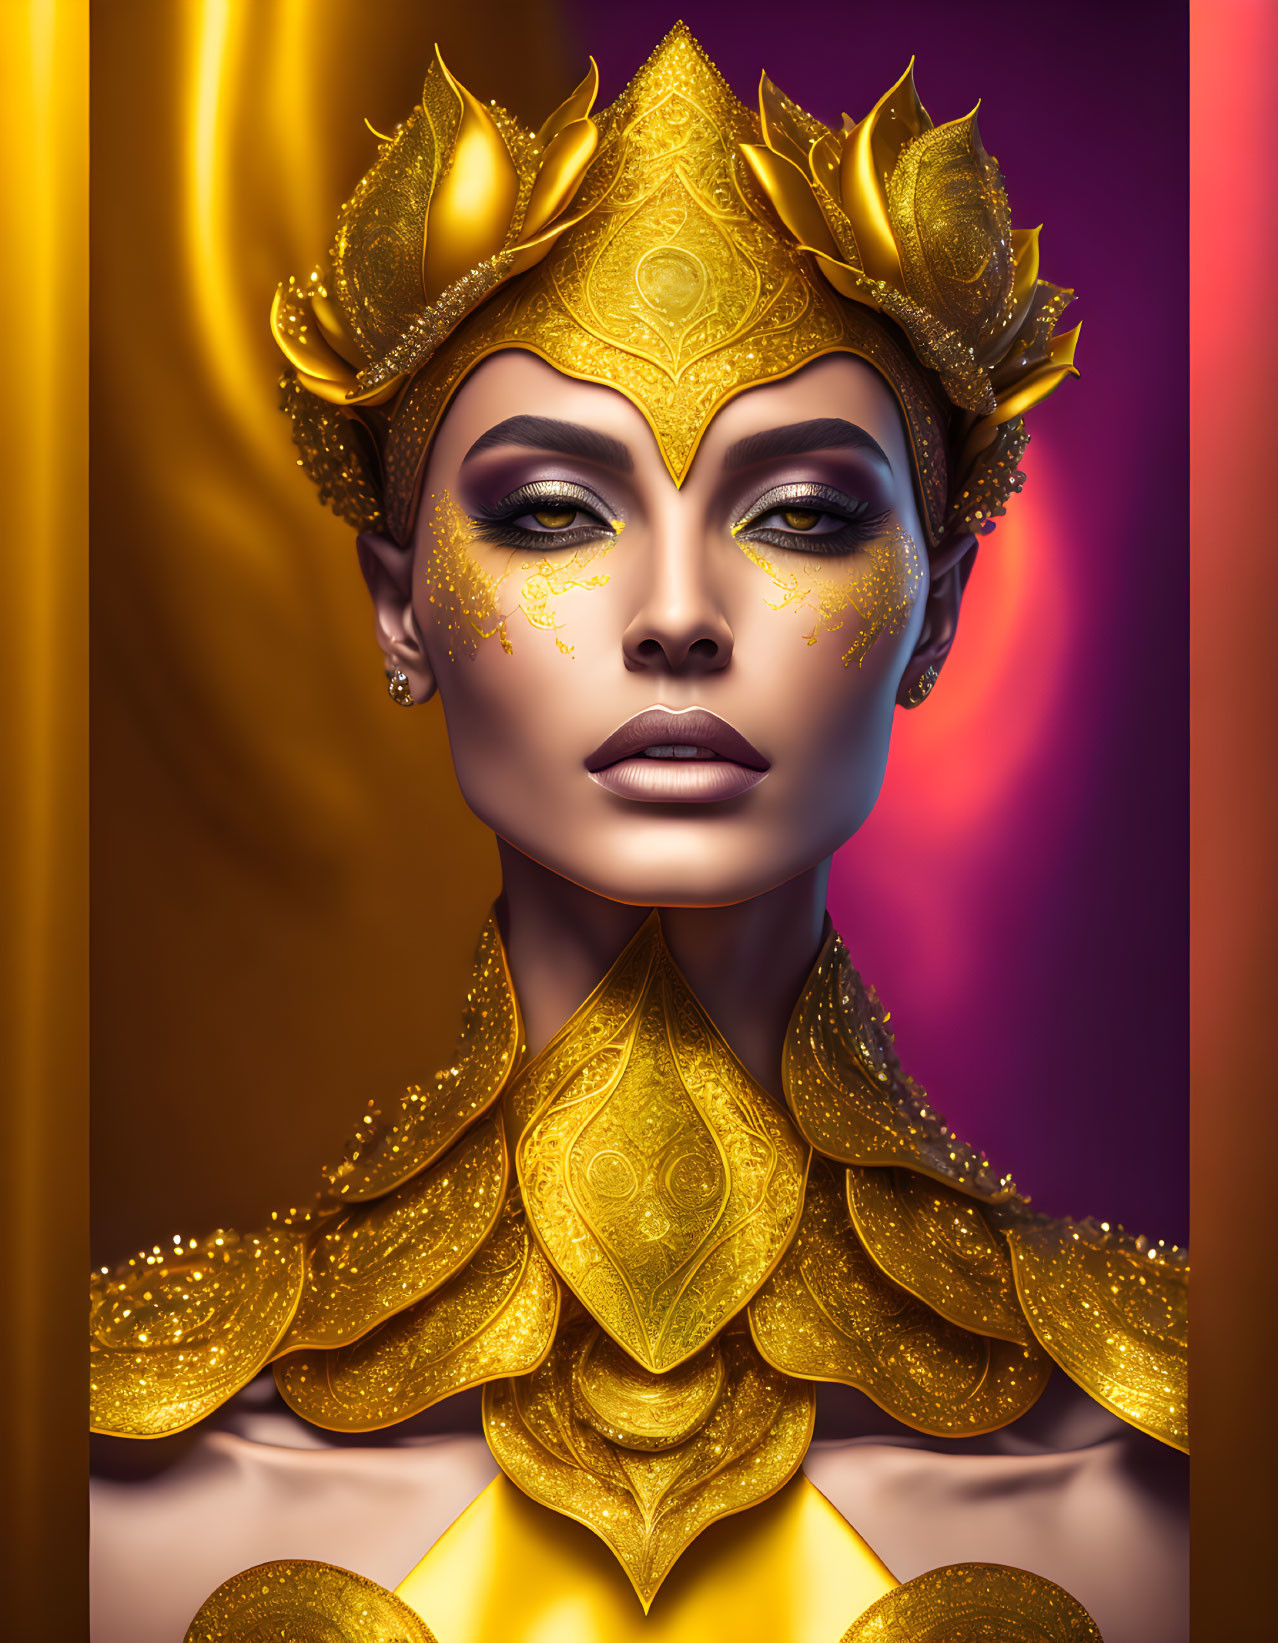 Regal Figure with Golden Headpiece on Vibrant Background